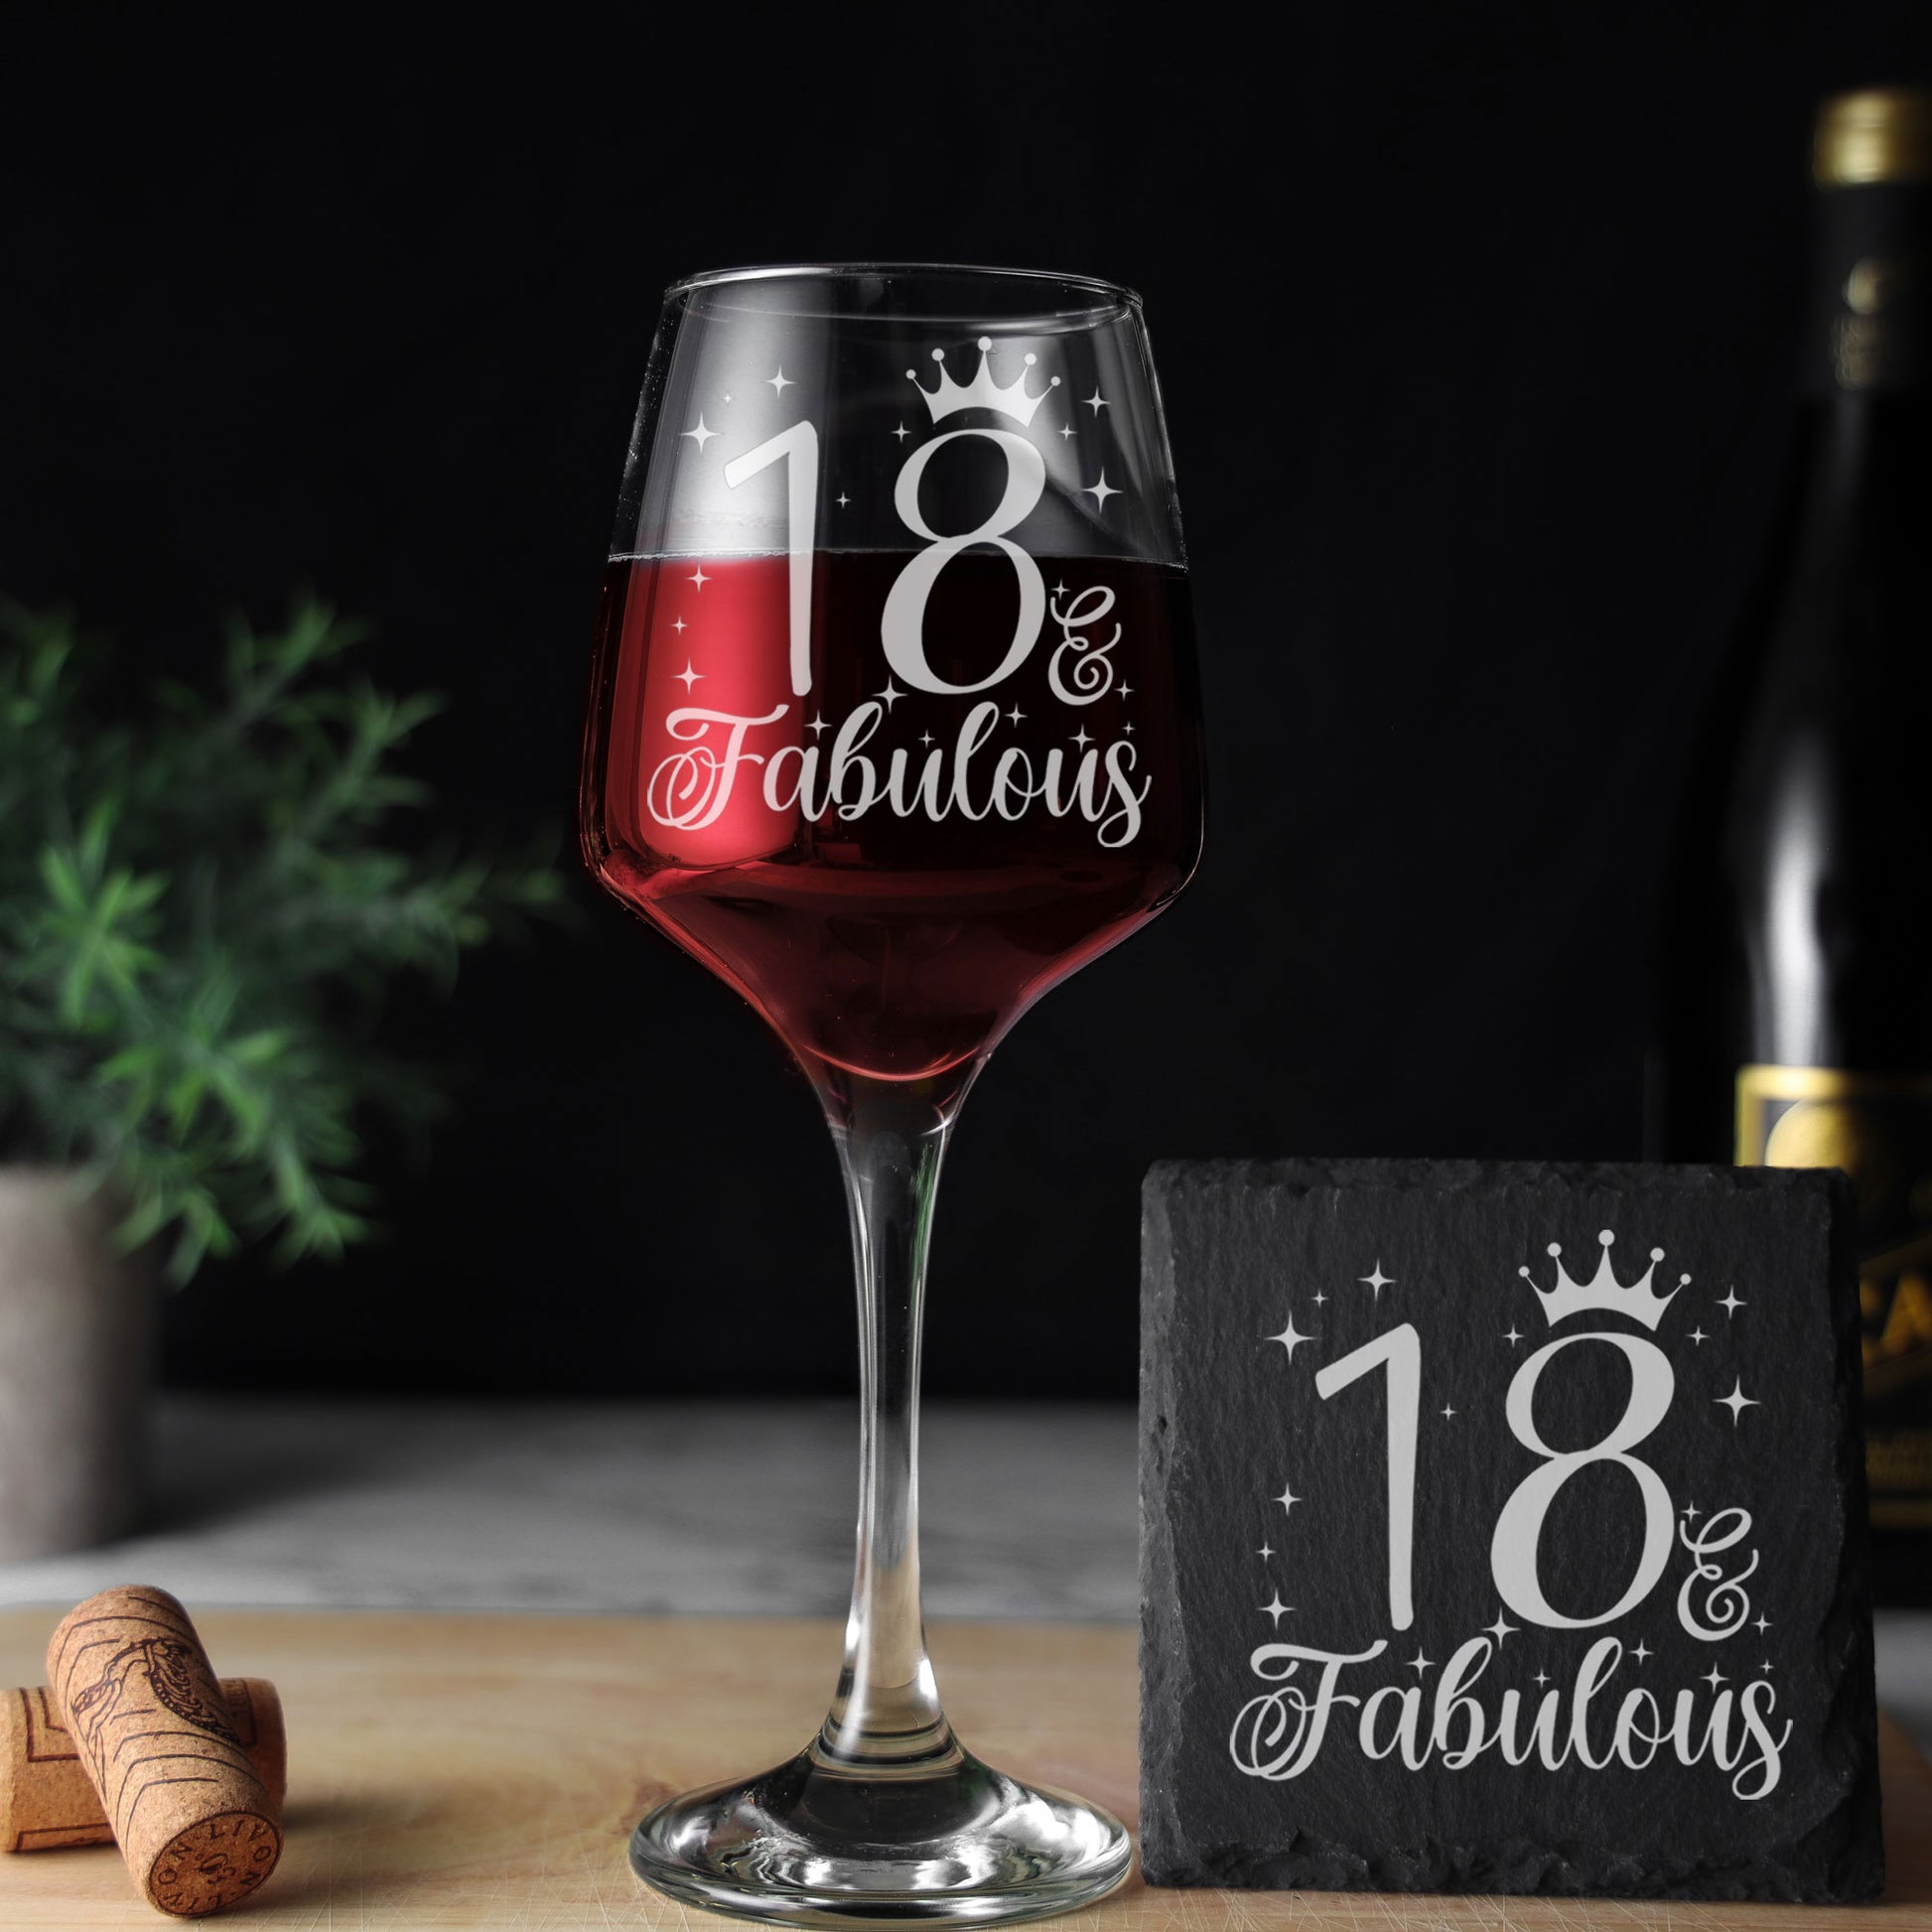 18 & Fabulous 18th Birthday Gift Engraved Wine Glass and/or Coaster Set  - Always Looking Good - Glass & Square Coaster  